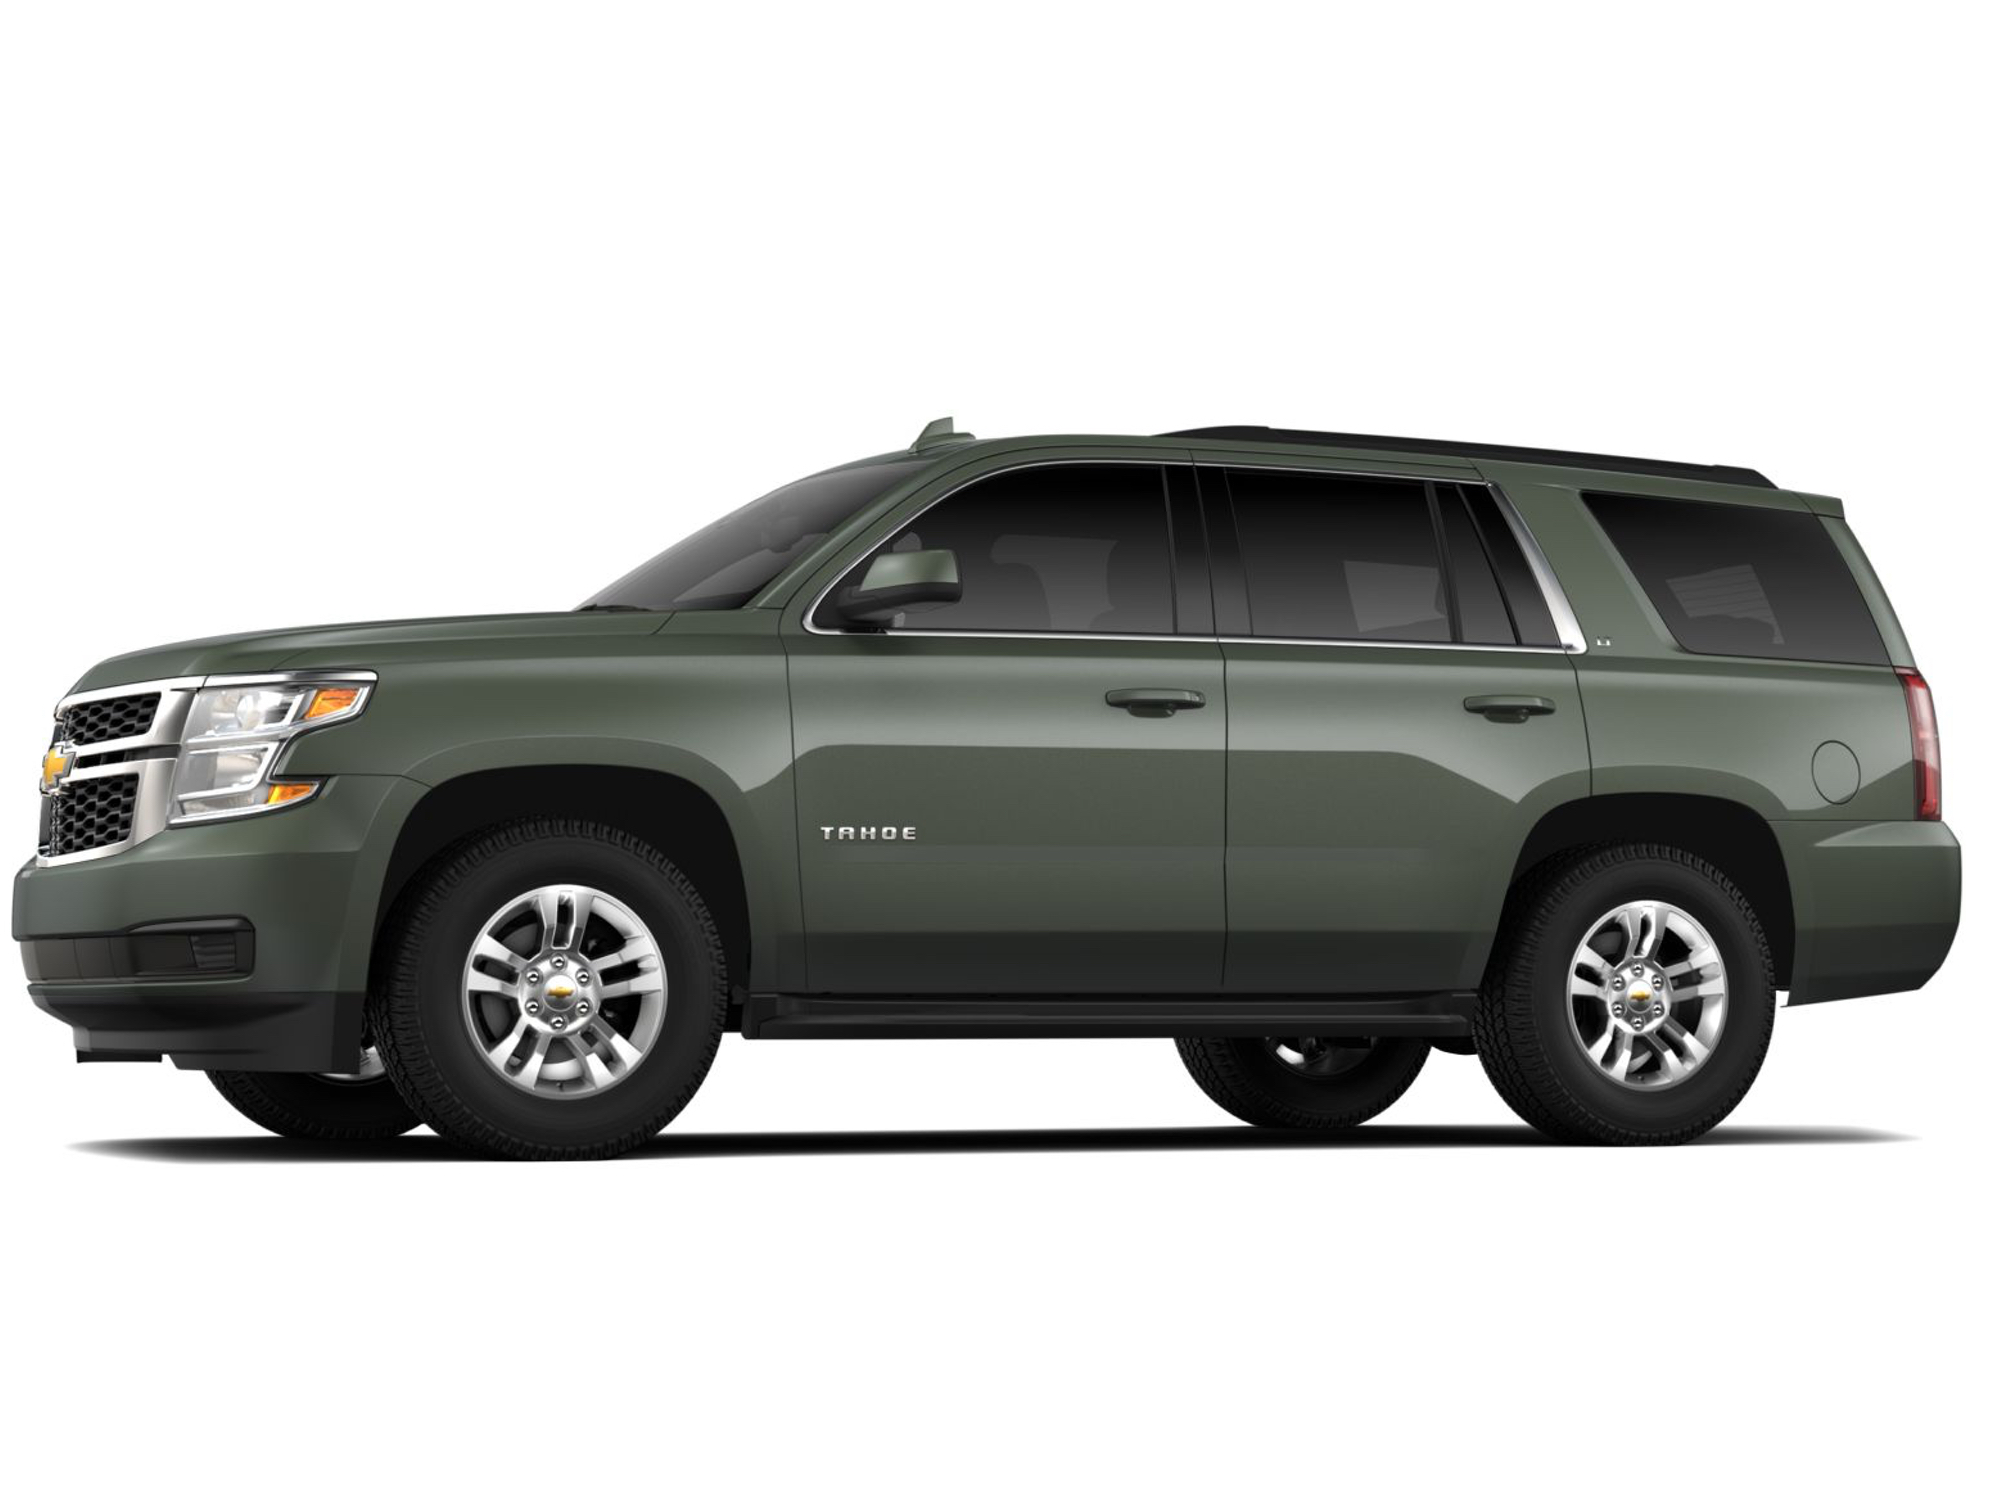 Minimalist 2019 Chevy Tahoe Exterior Colors with Simple Decor